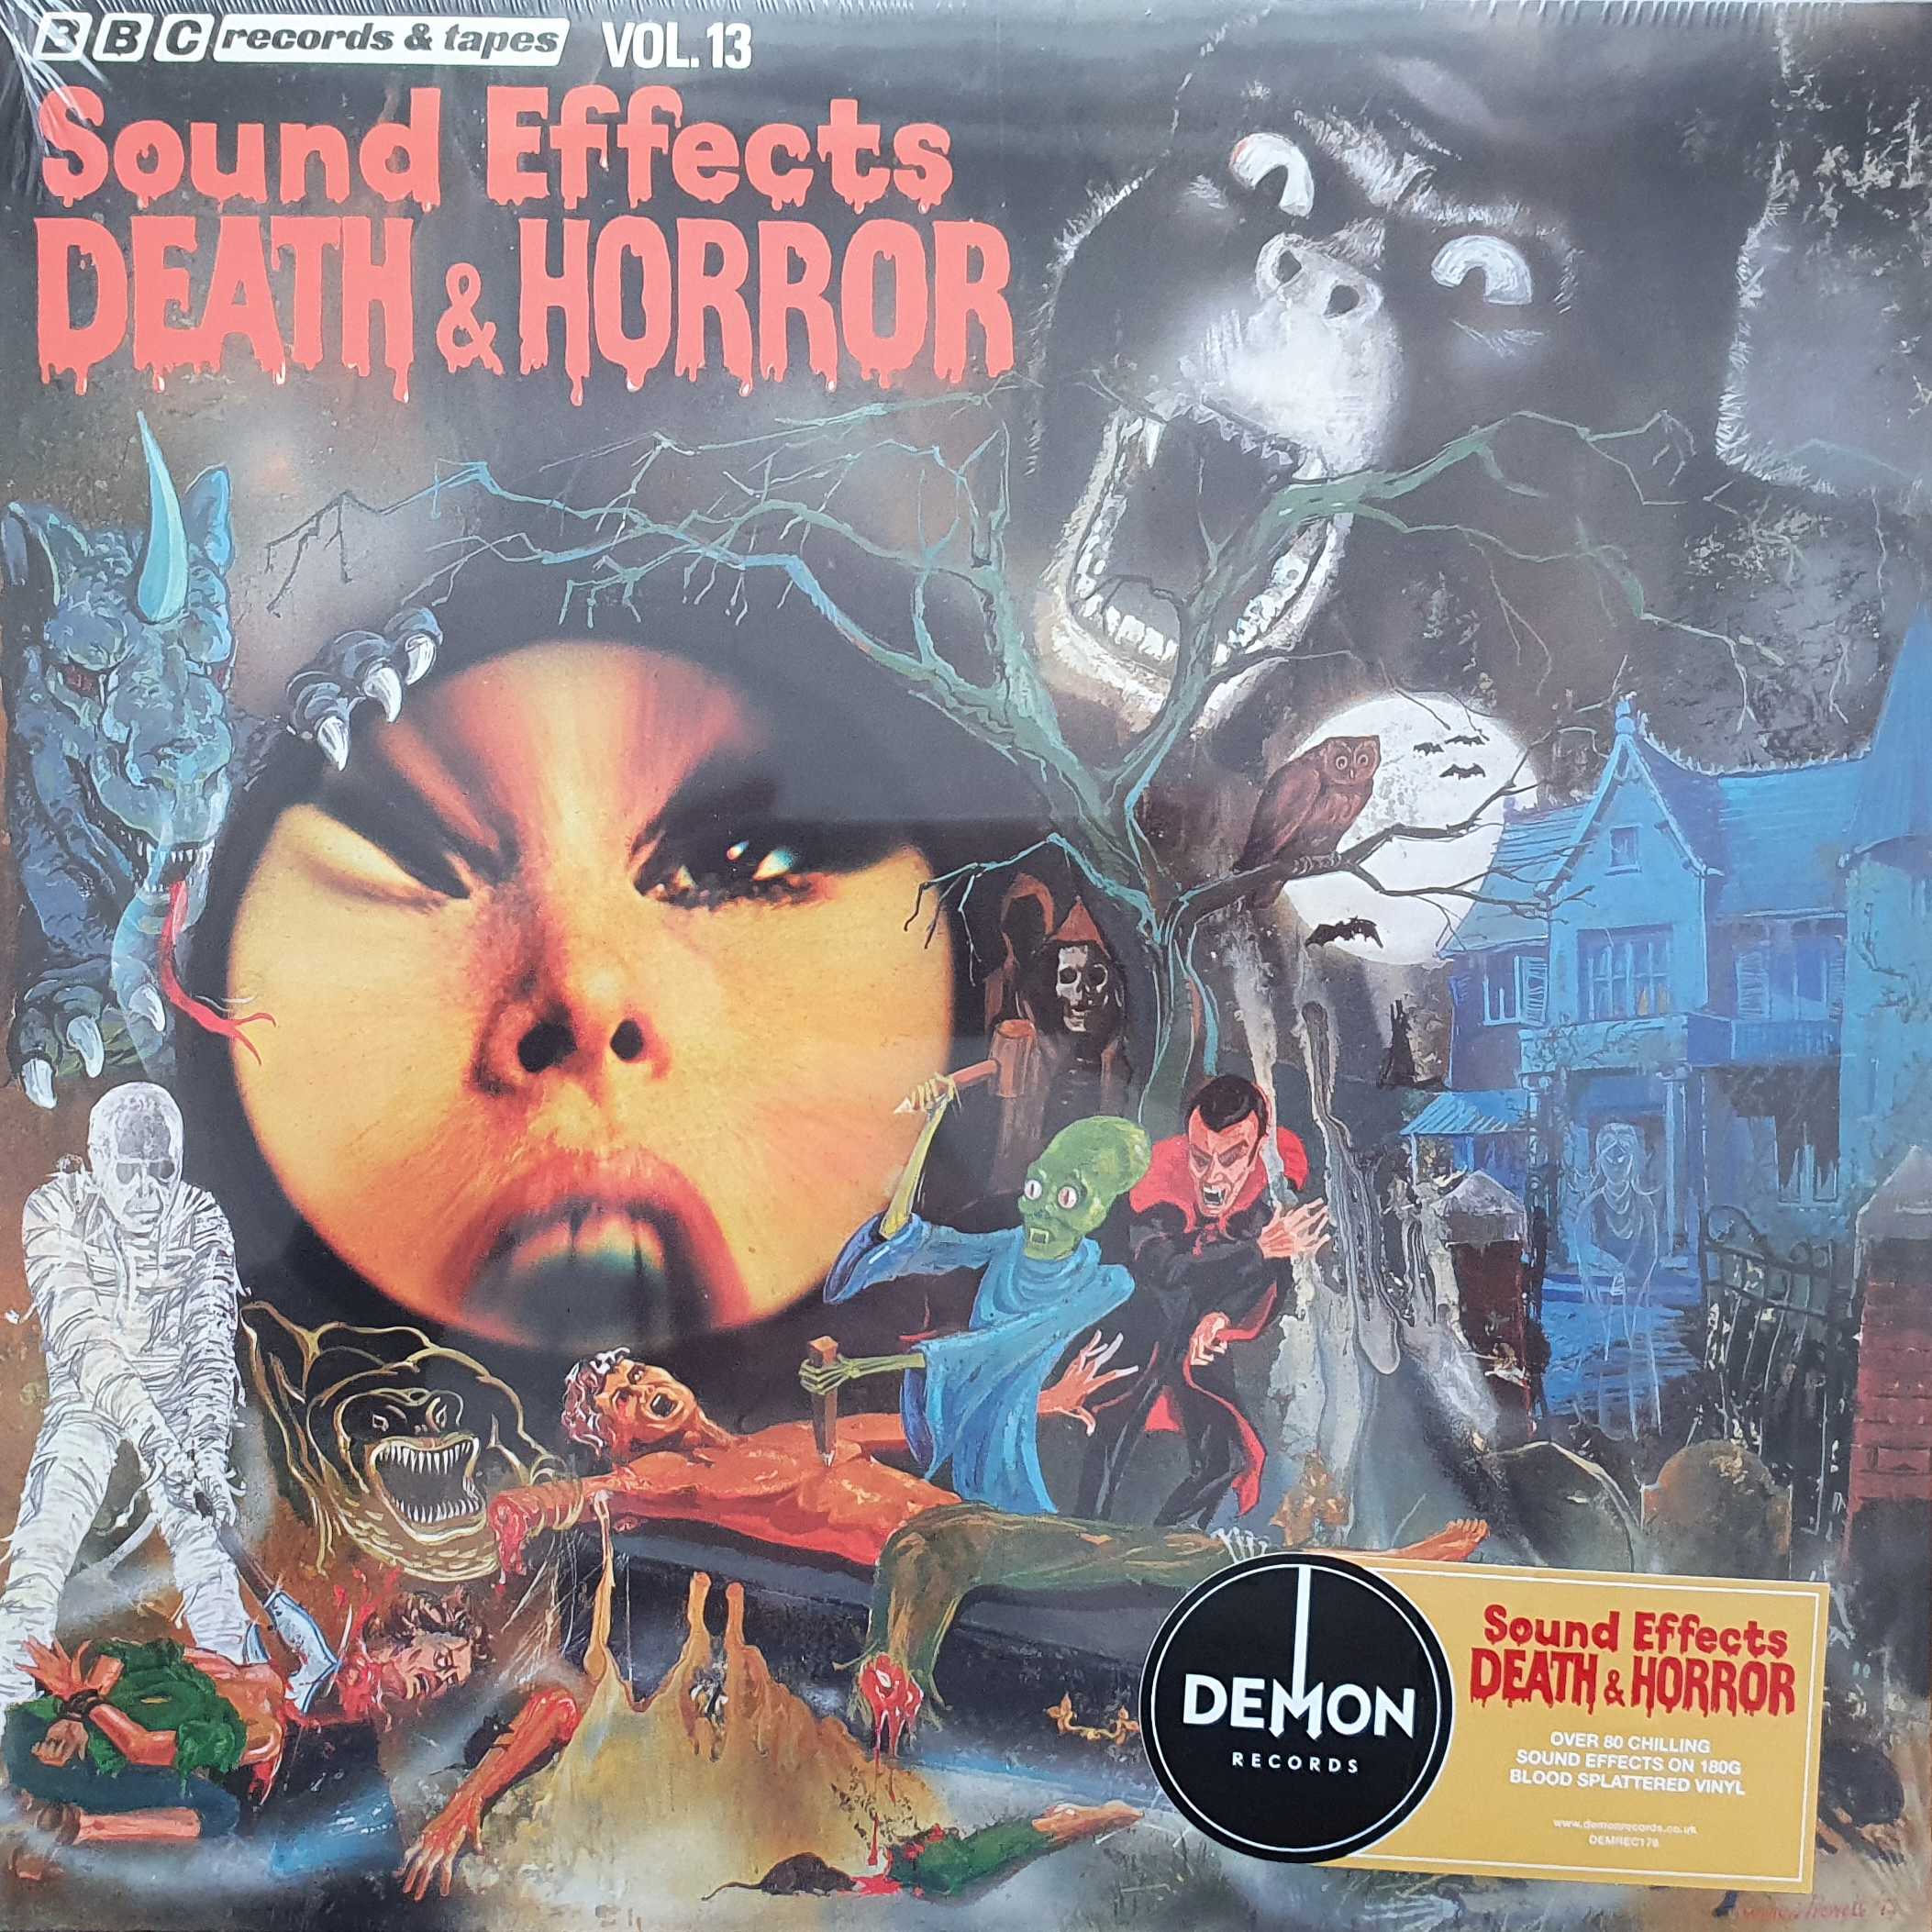 Picture of DEMREC 176 Sound effects - Death & horror ((Limited edition - Blood spotted vinyl) album by artist Various from the BBC records and Tapes library